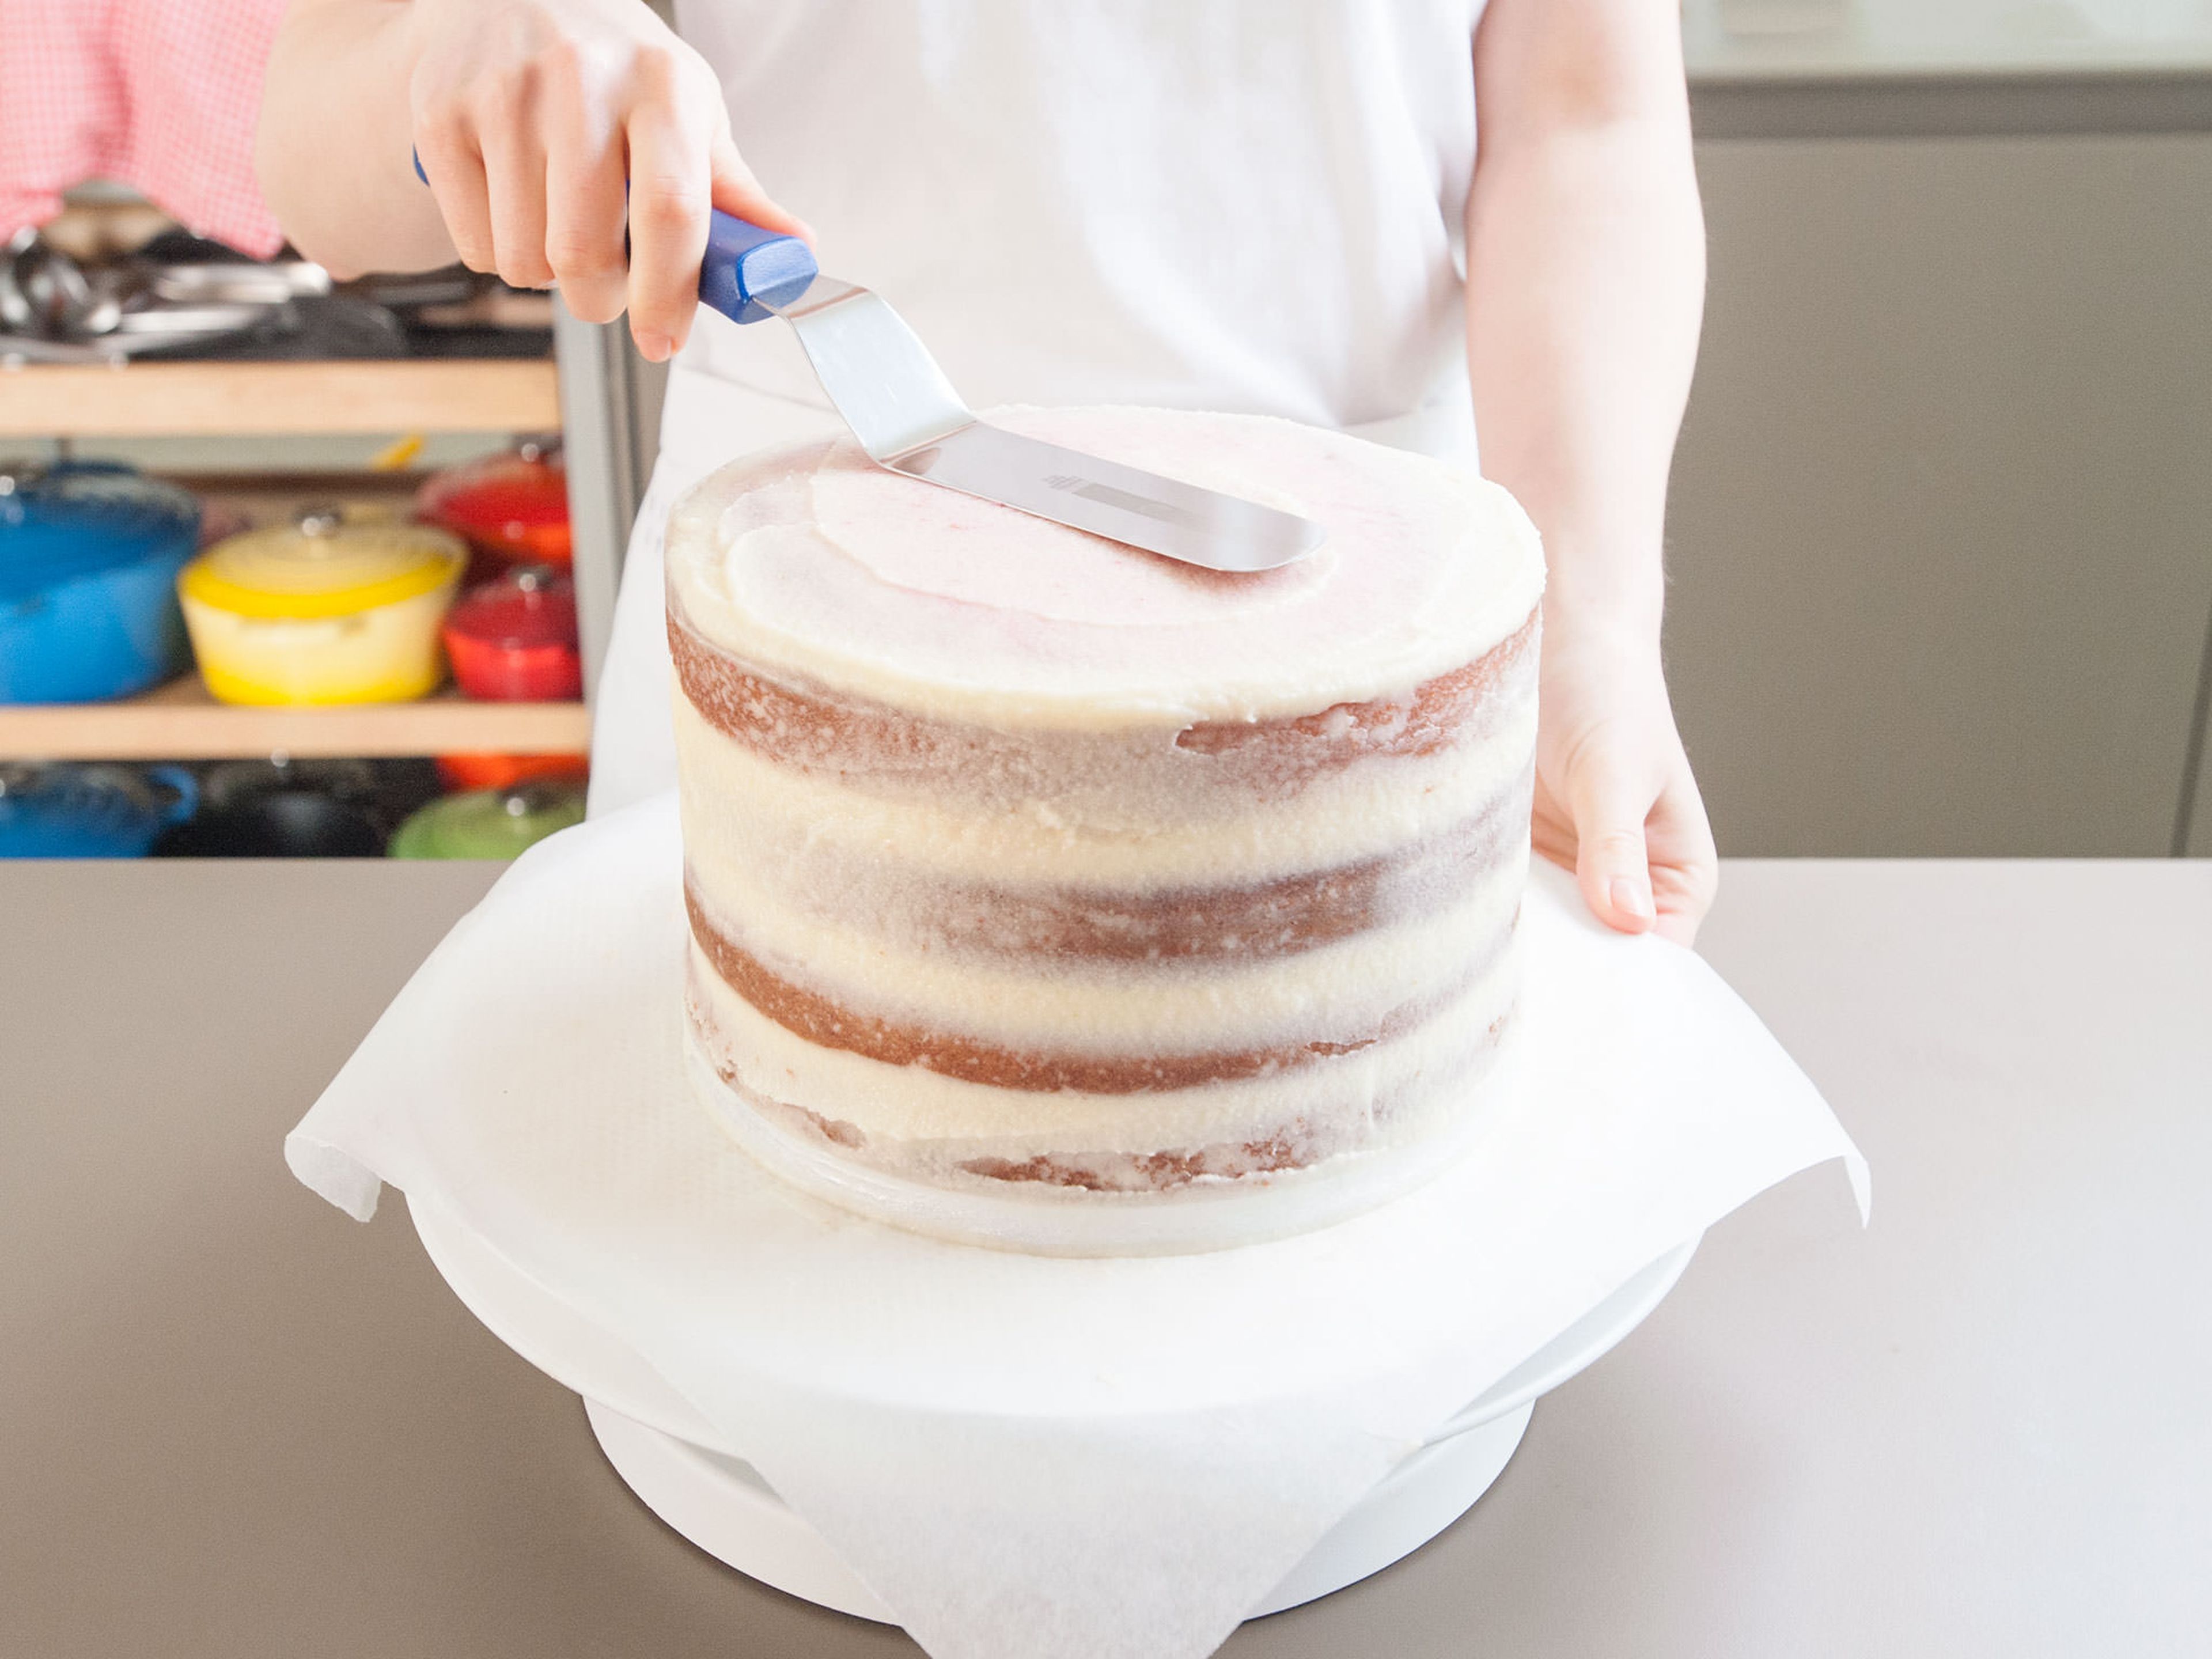 When cake is chilled, coat outside with remaining buttercream, reserving a small amount if you’d like to write on cake later. Refrigerate for approx. 15 minutes.